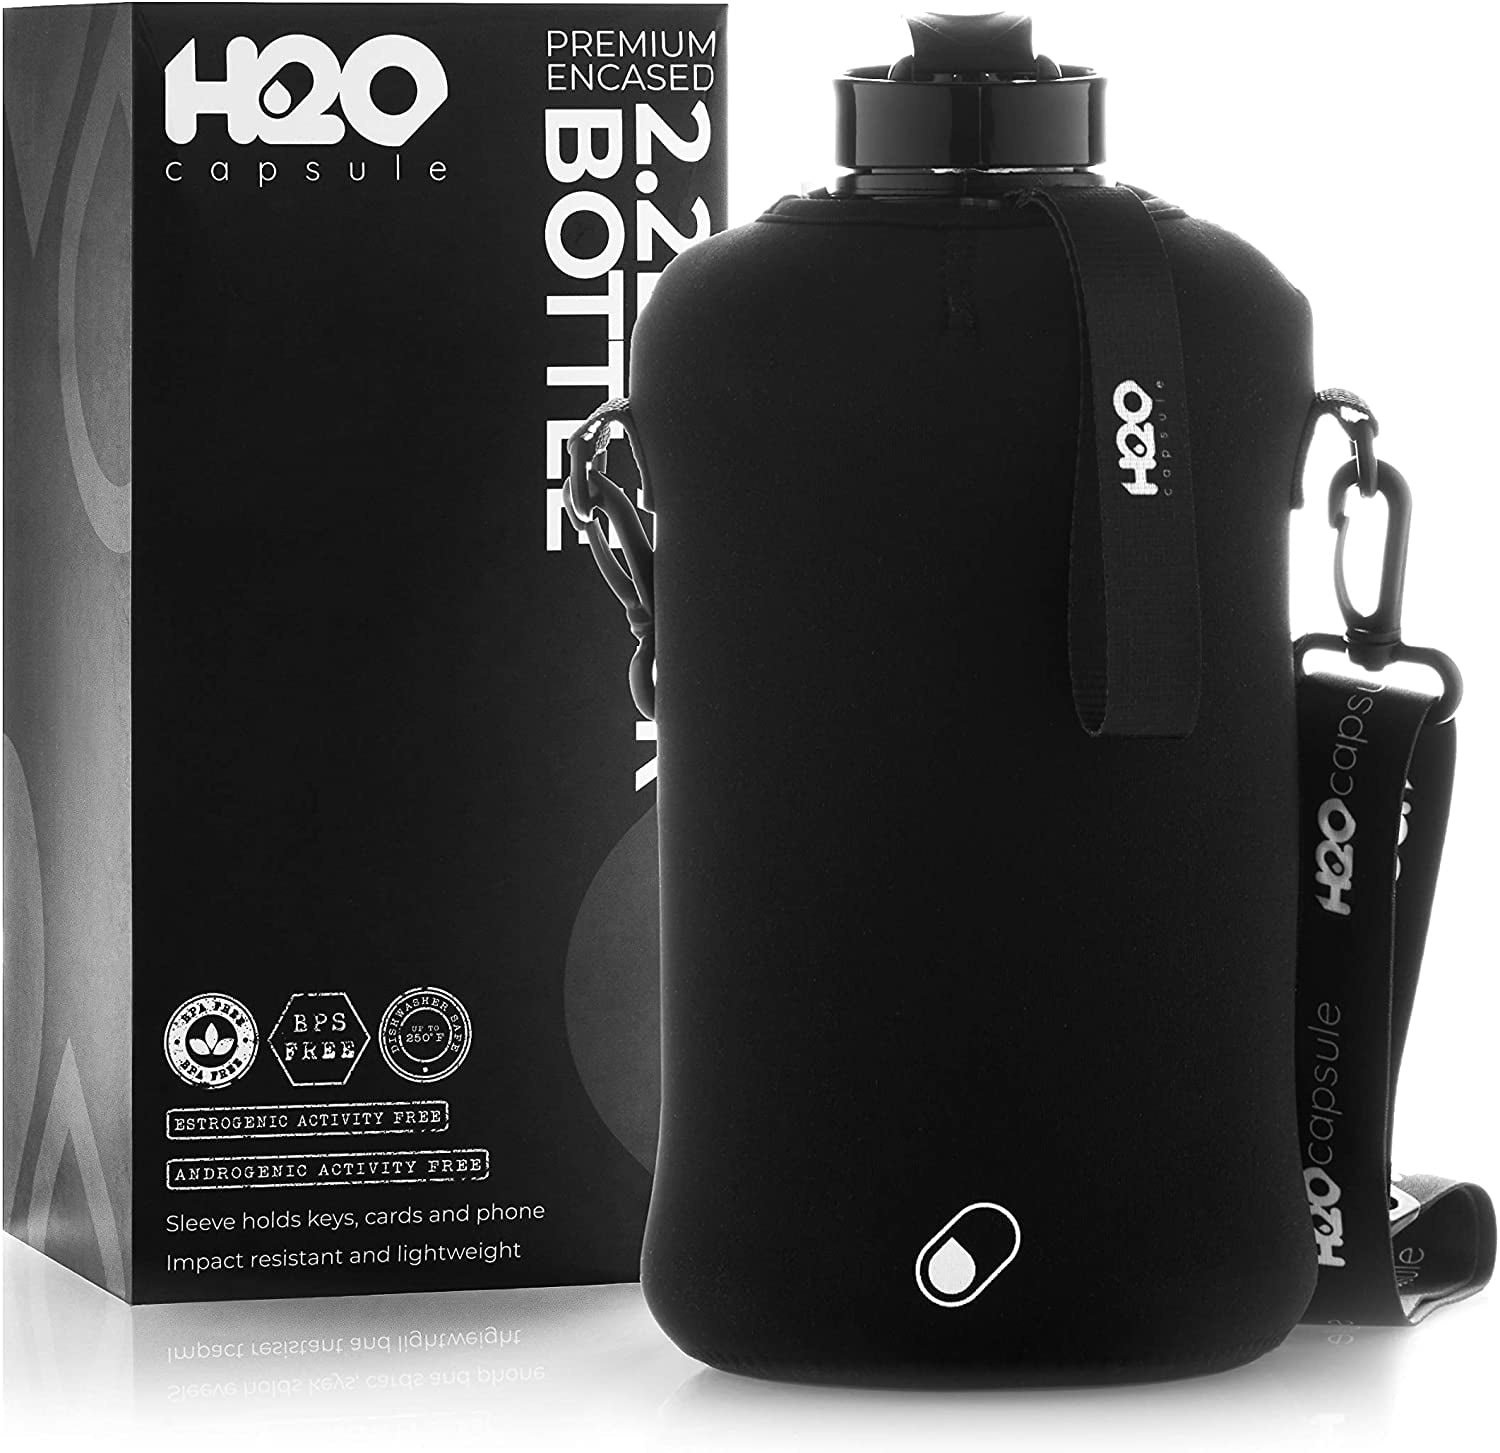 Hydrate 2.2 Litre Water Bottle - Now with Easy Drink Cap - Durable & E